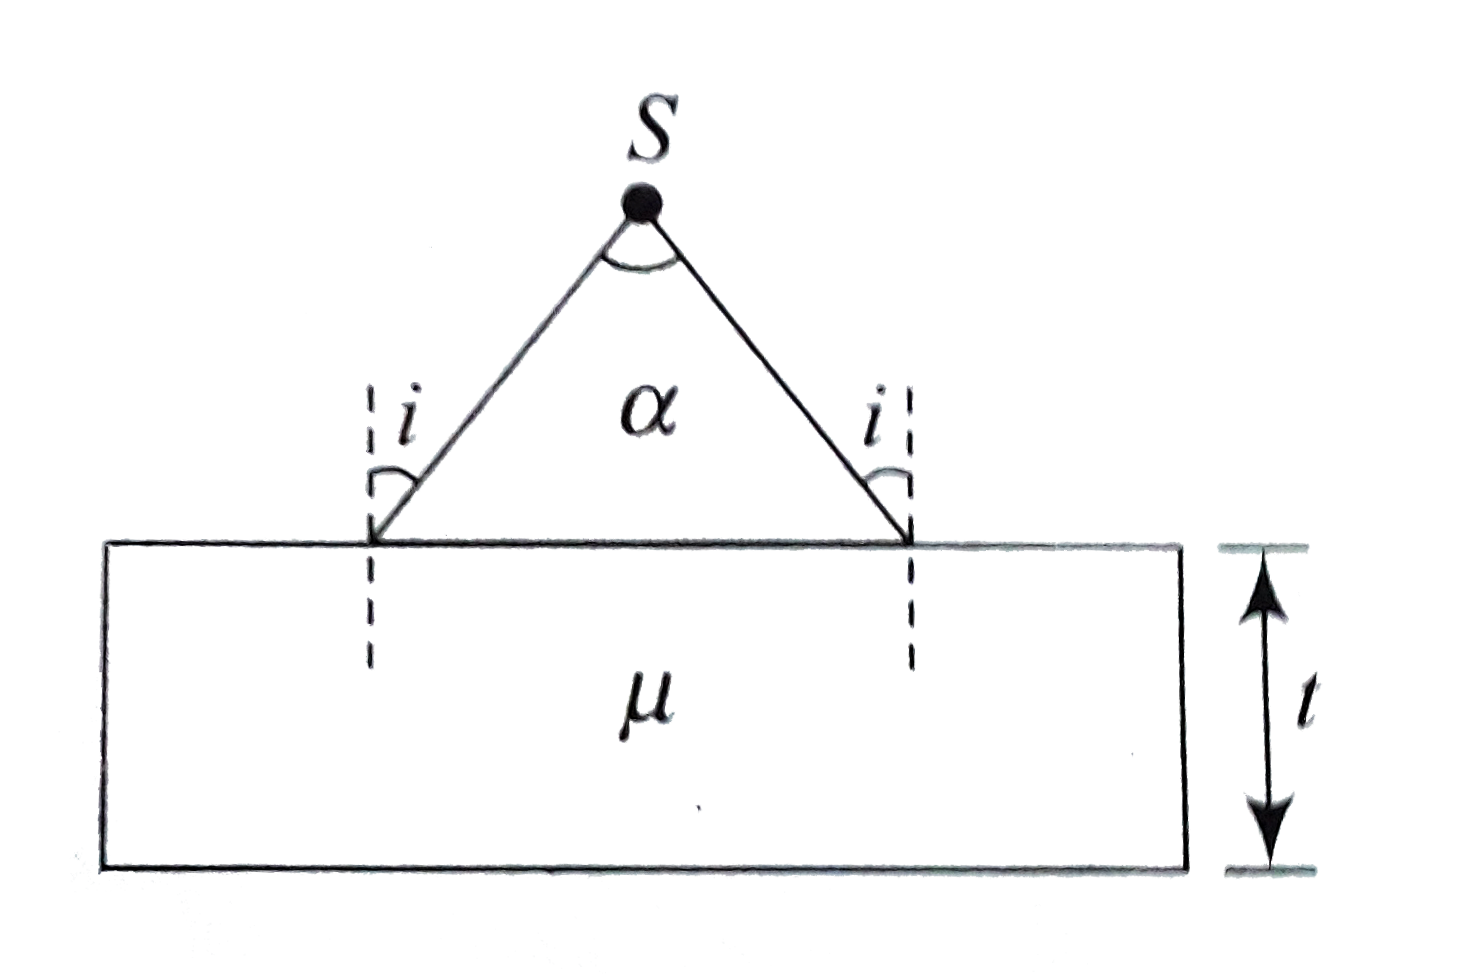 A diverging beam of light from a  point source S having divergence angle alpha, falls symmetrically on a glass slab as shown. The angles of incidence of the two extrem rays are equal. If the thickness of the glass slab is t and the refractive index n, then the divergence angle of the emergent beam is